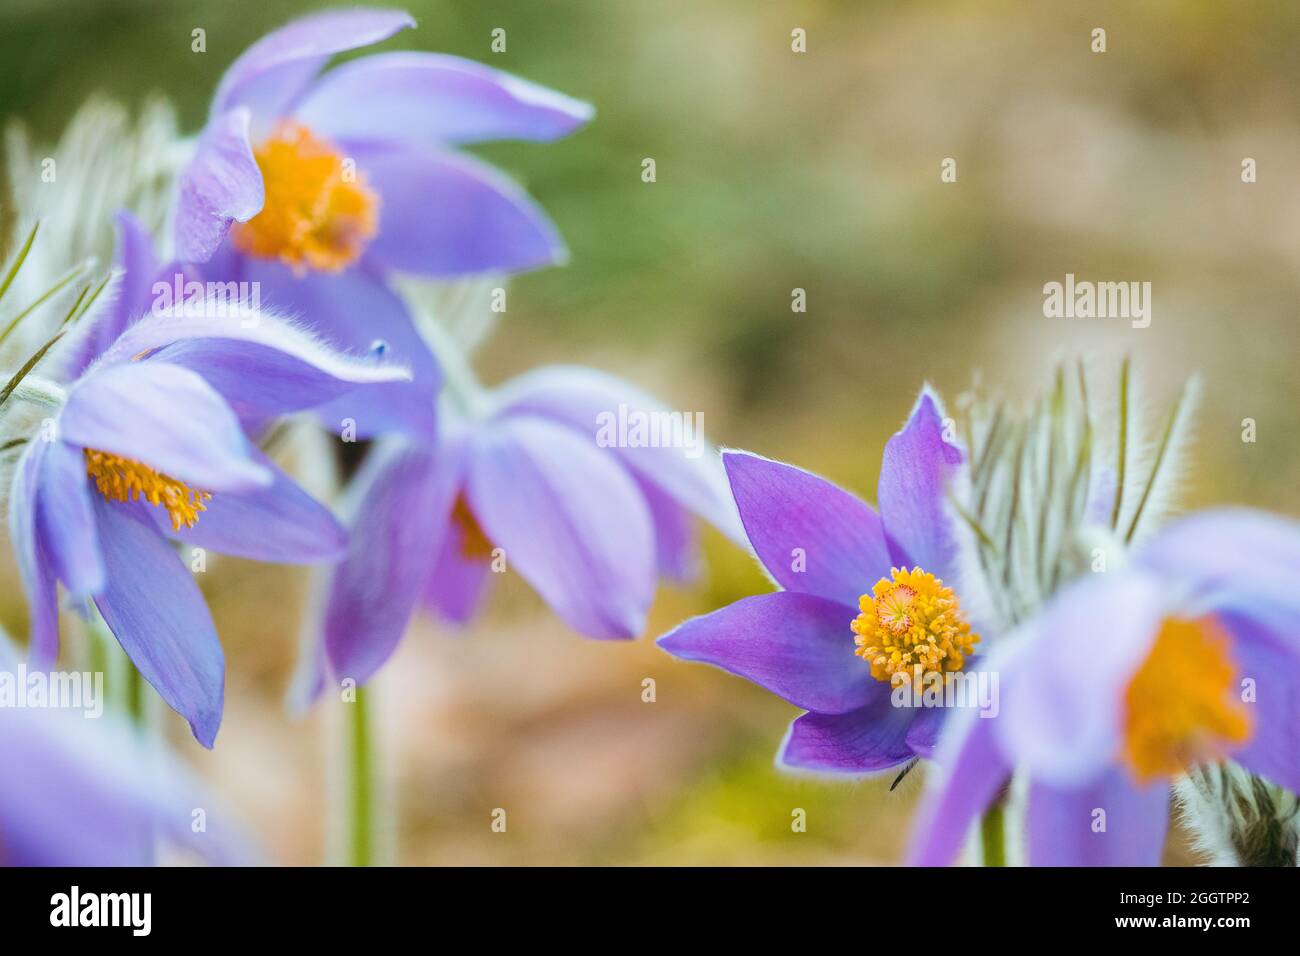 Beautiful Wild Spring Flowers Pulsatilla Patens. Flowering Blooming Plant In Family Ranunculaceae, Native To Europe, Russia, Mongolia, China, Canada Stock Photo